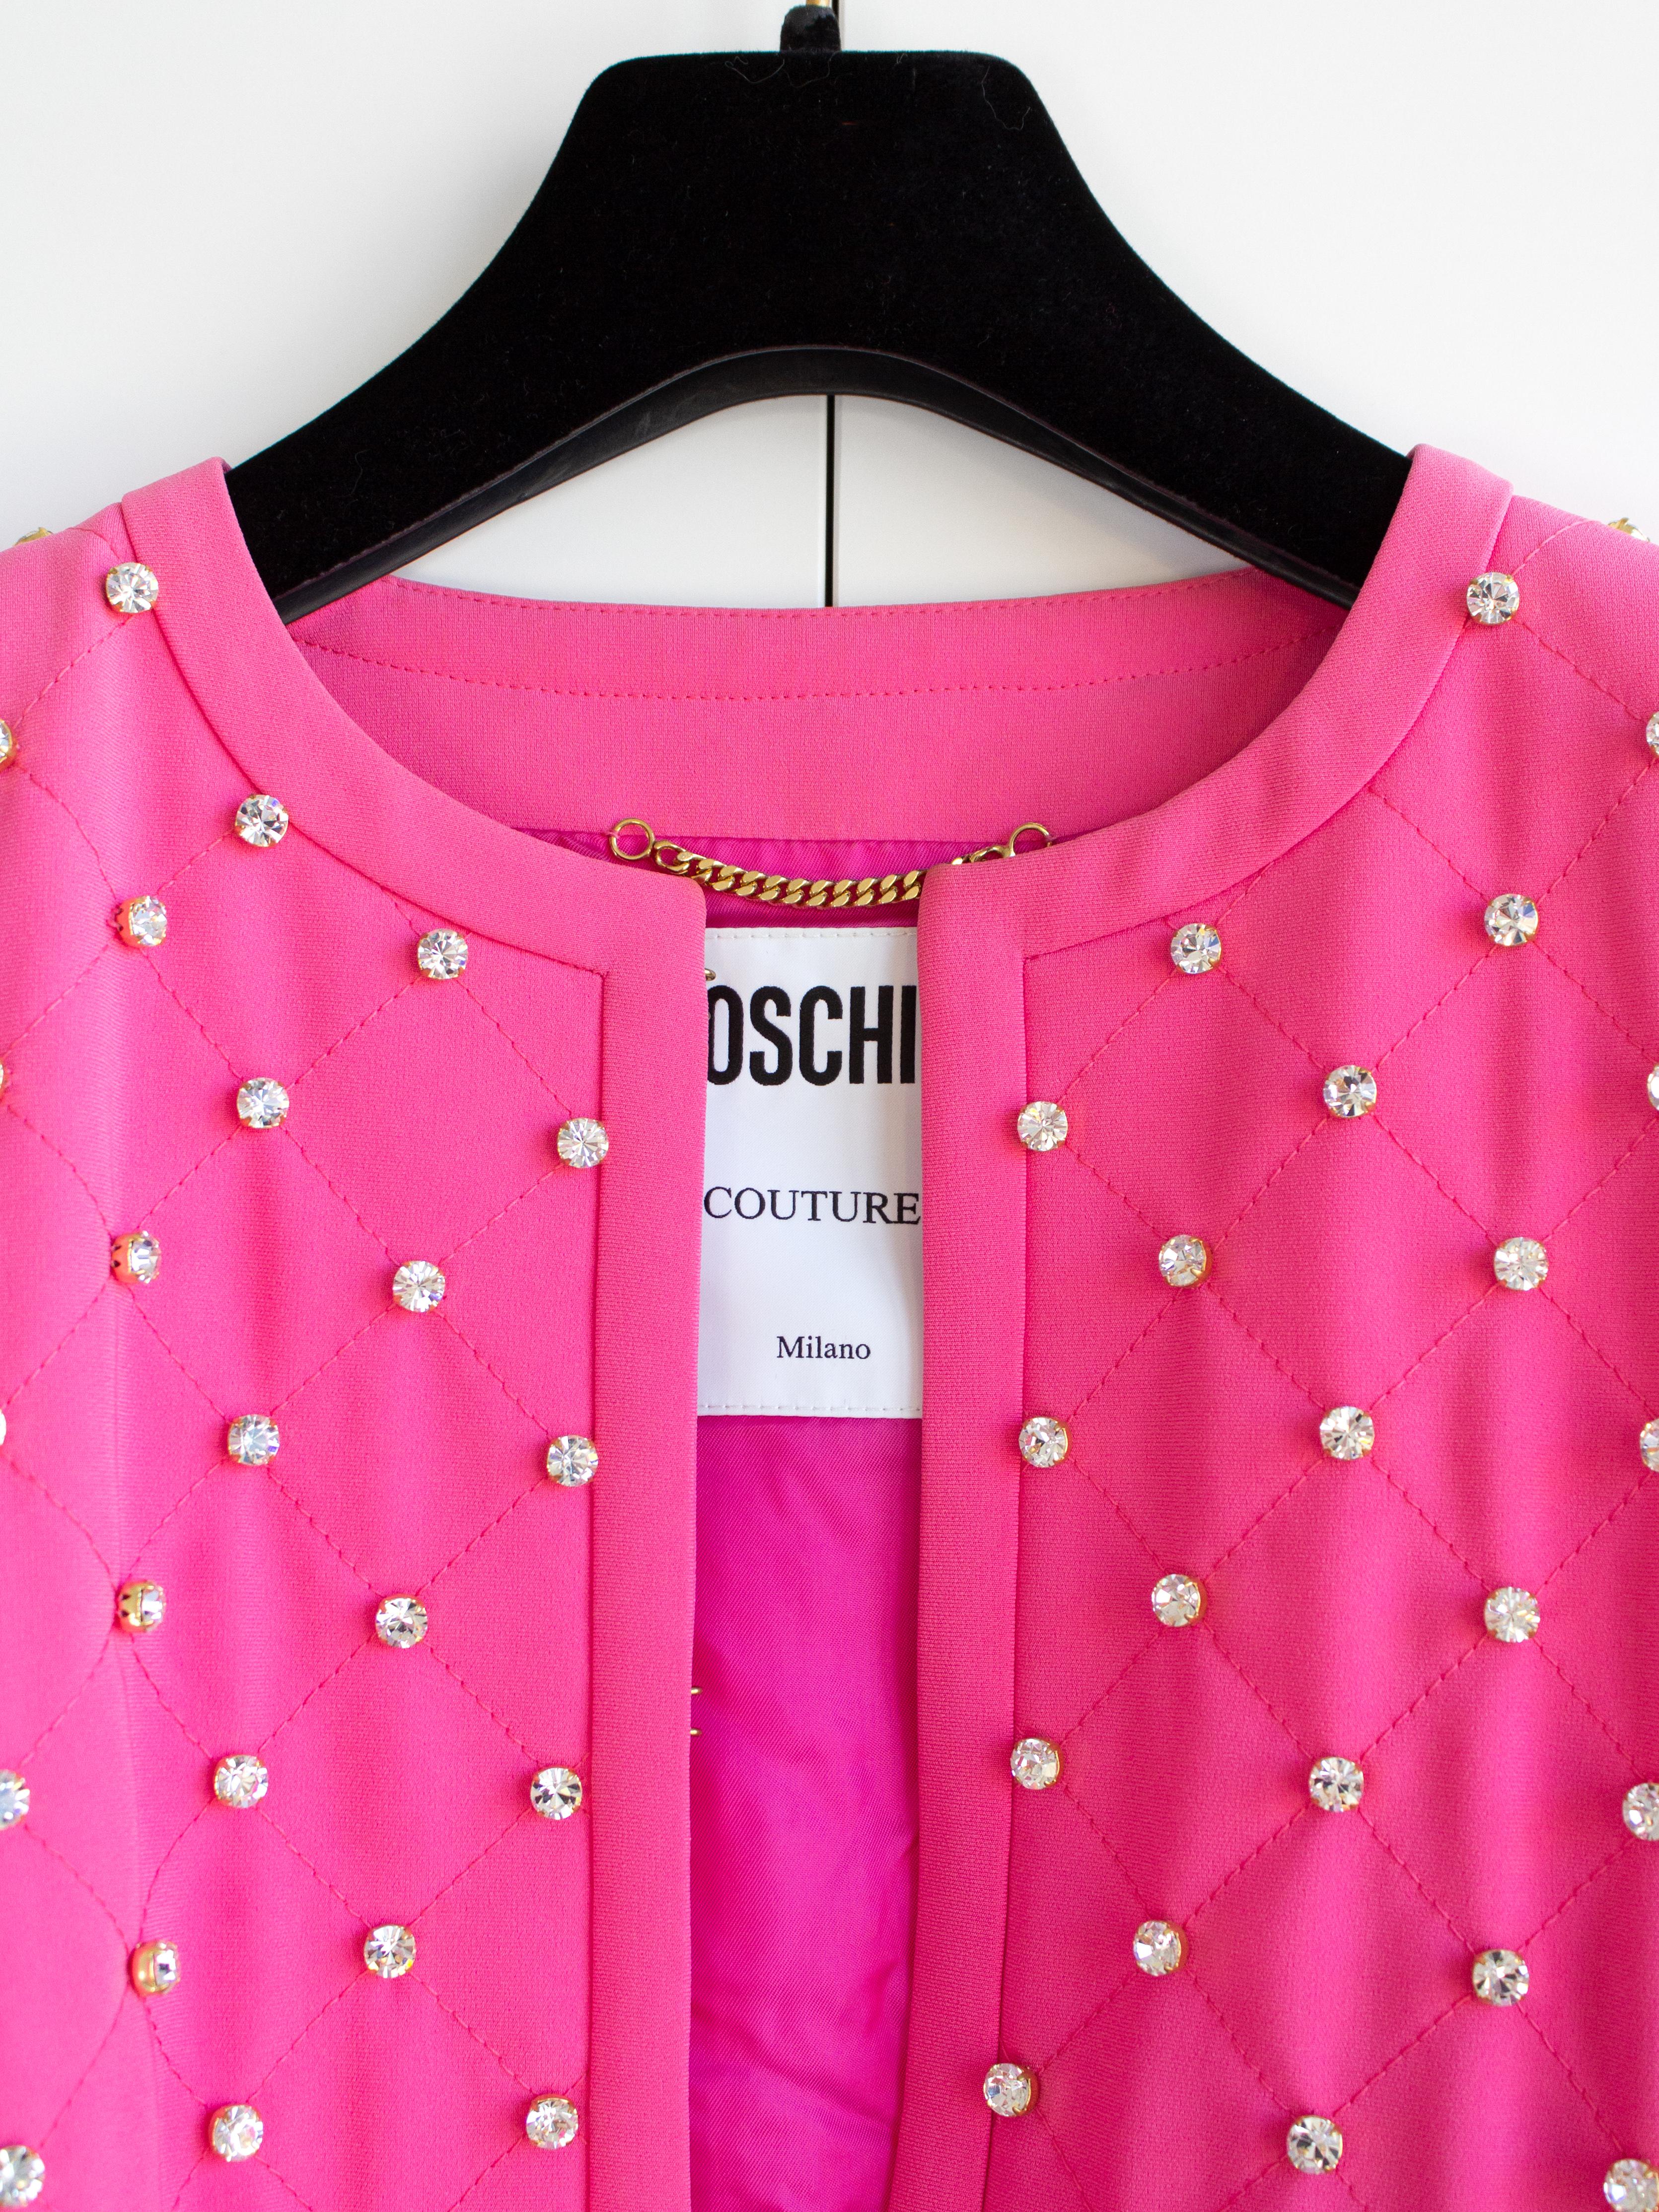 Moschino Couture S/S 2015 Barbie Crystal Embellished Rhinestone Pink Jacket For Sale 4